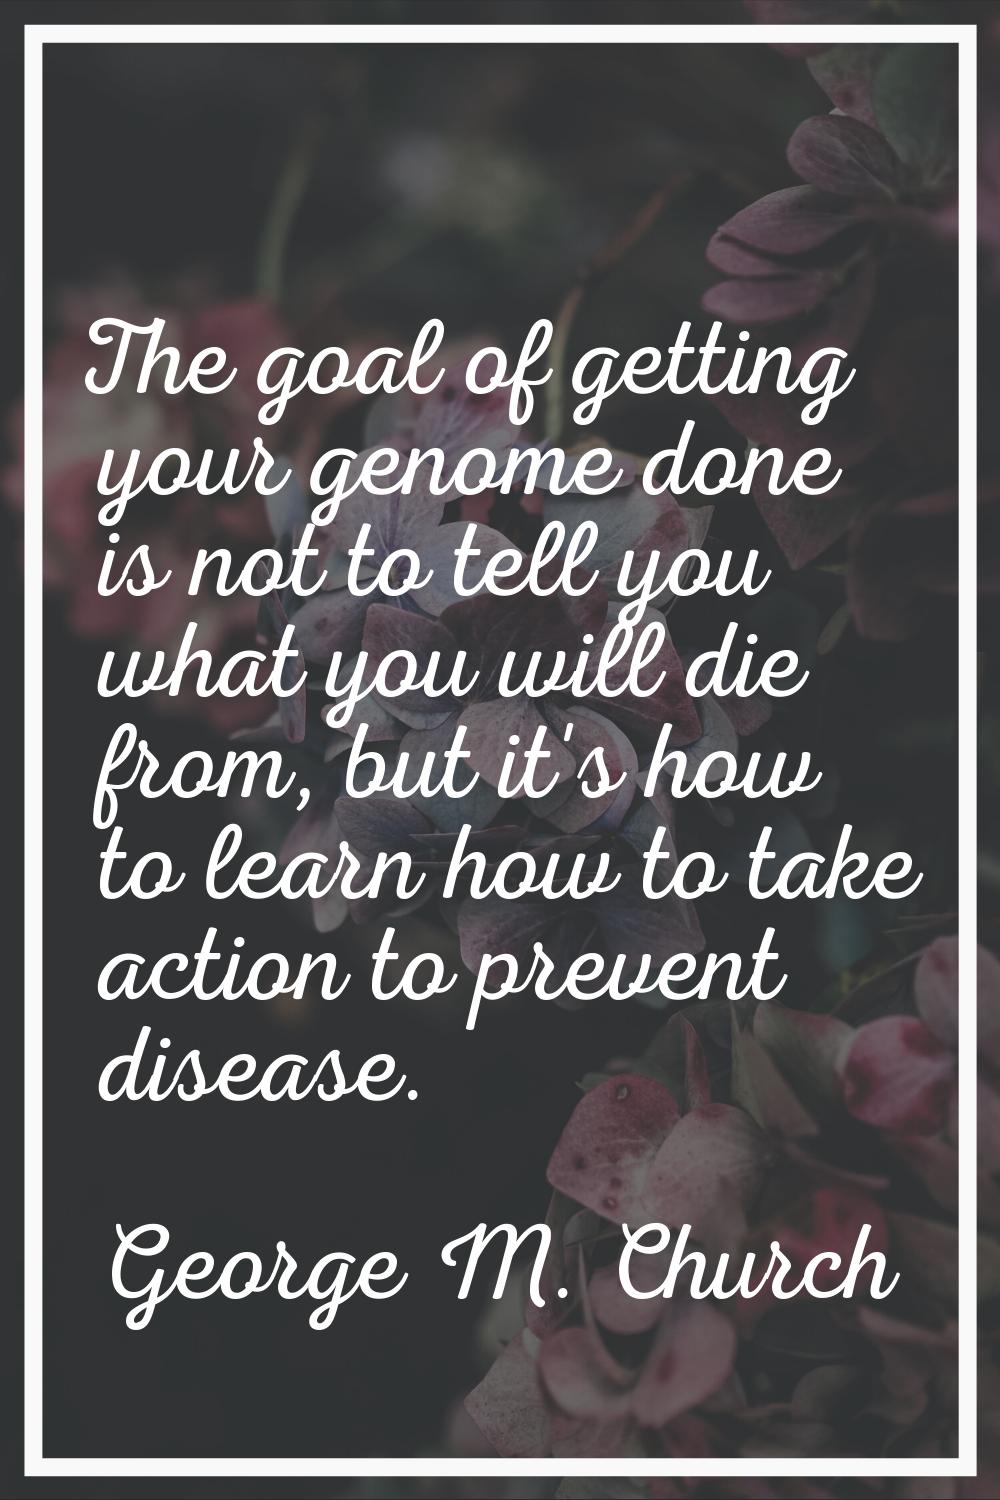 The goal of getting your genome done is not to tell you what you will die from, but it's how to lea